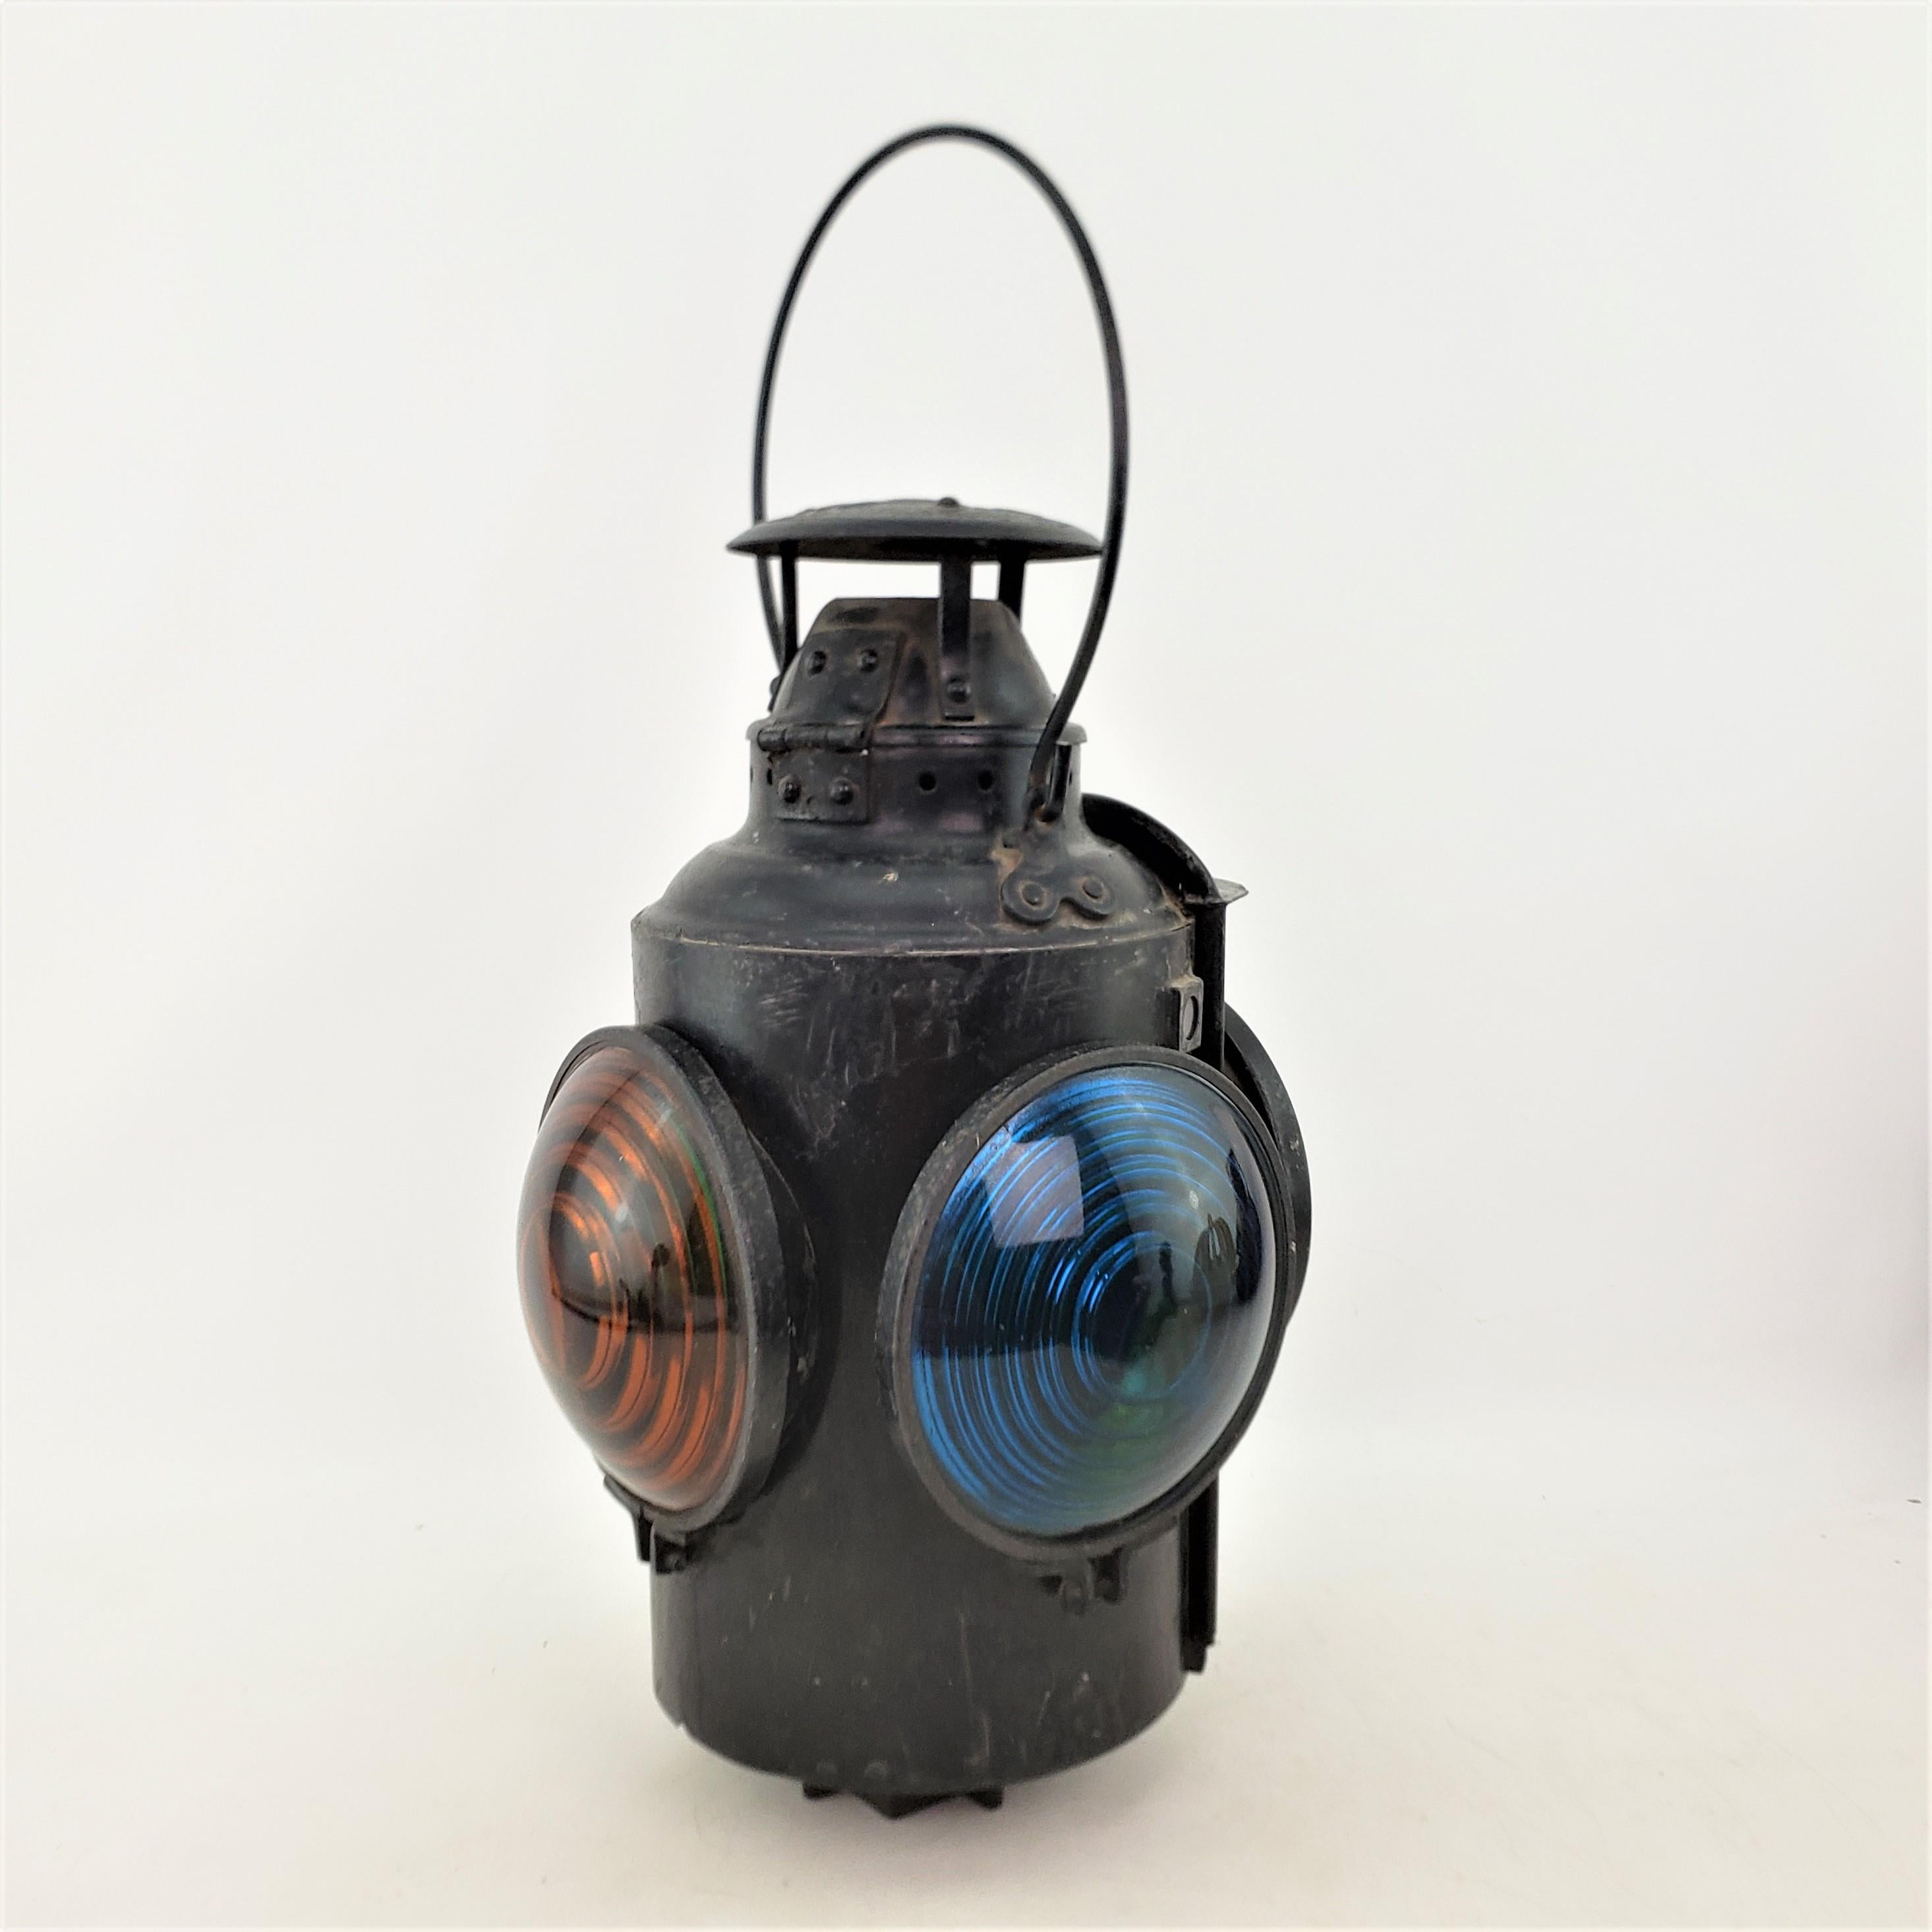 Antique Canadian National Railway Piper Signal Lantern For Sale at